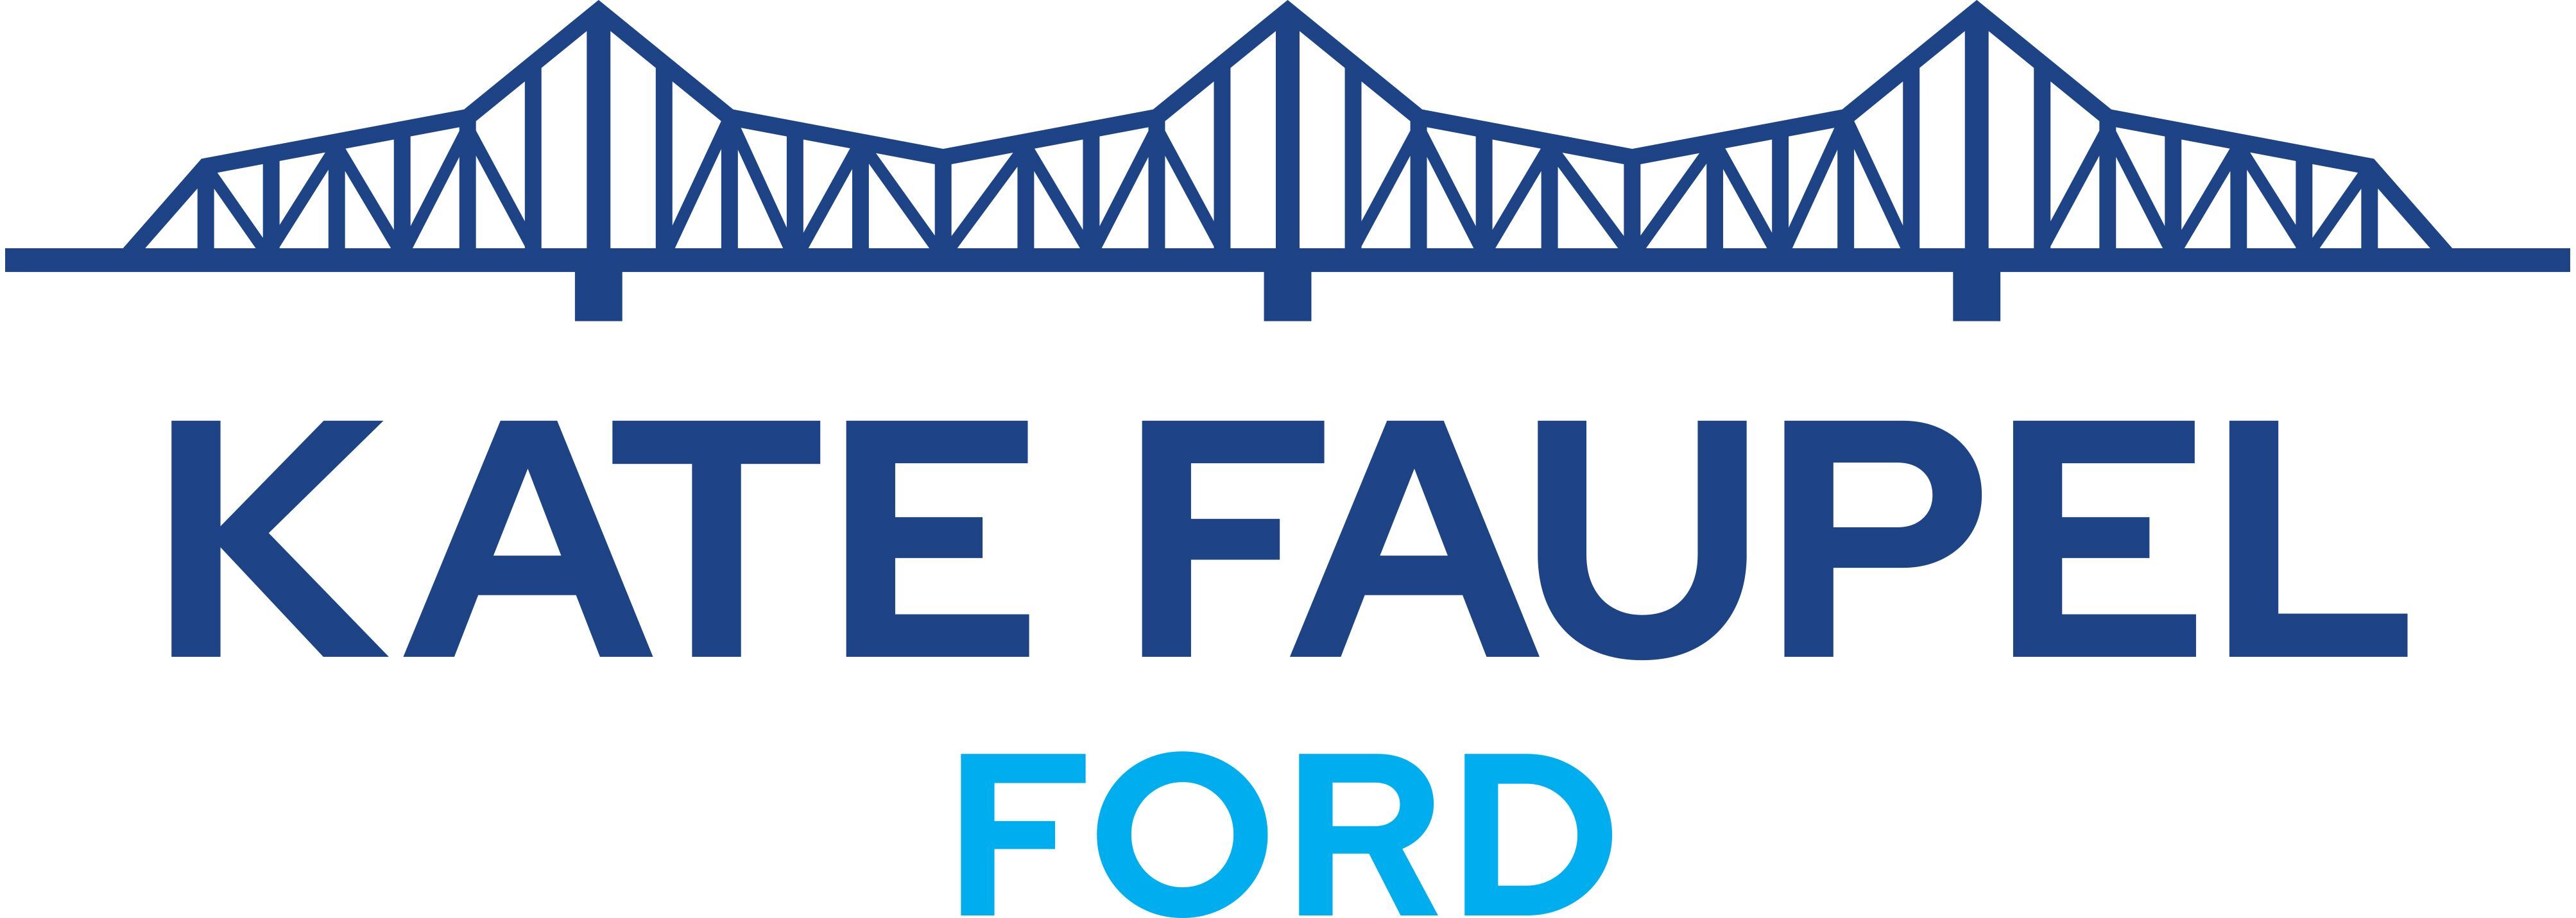 Kate Faupel Ford